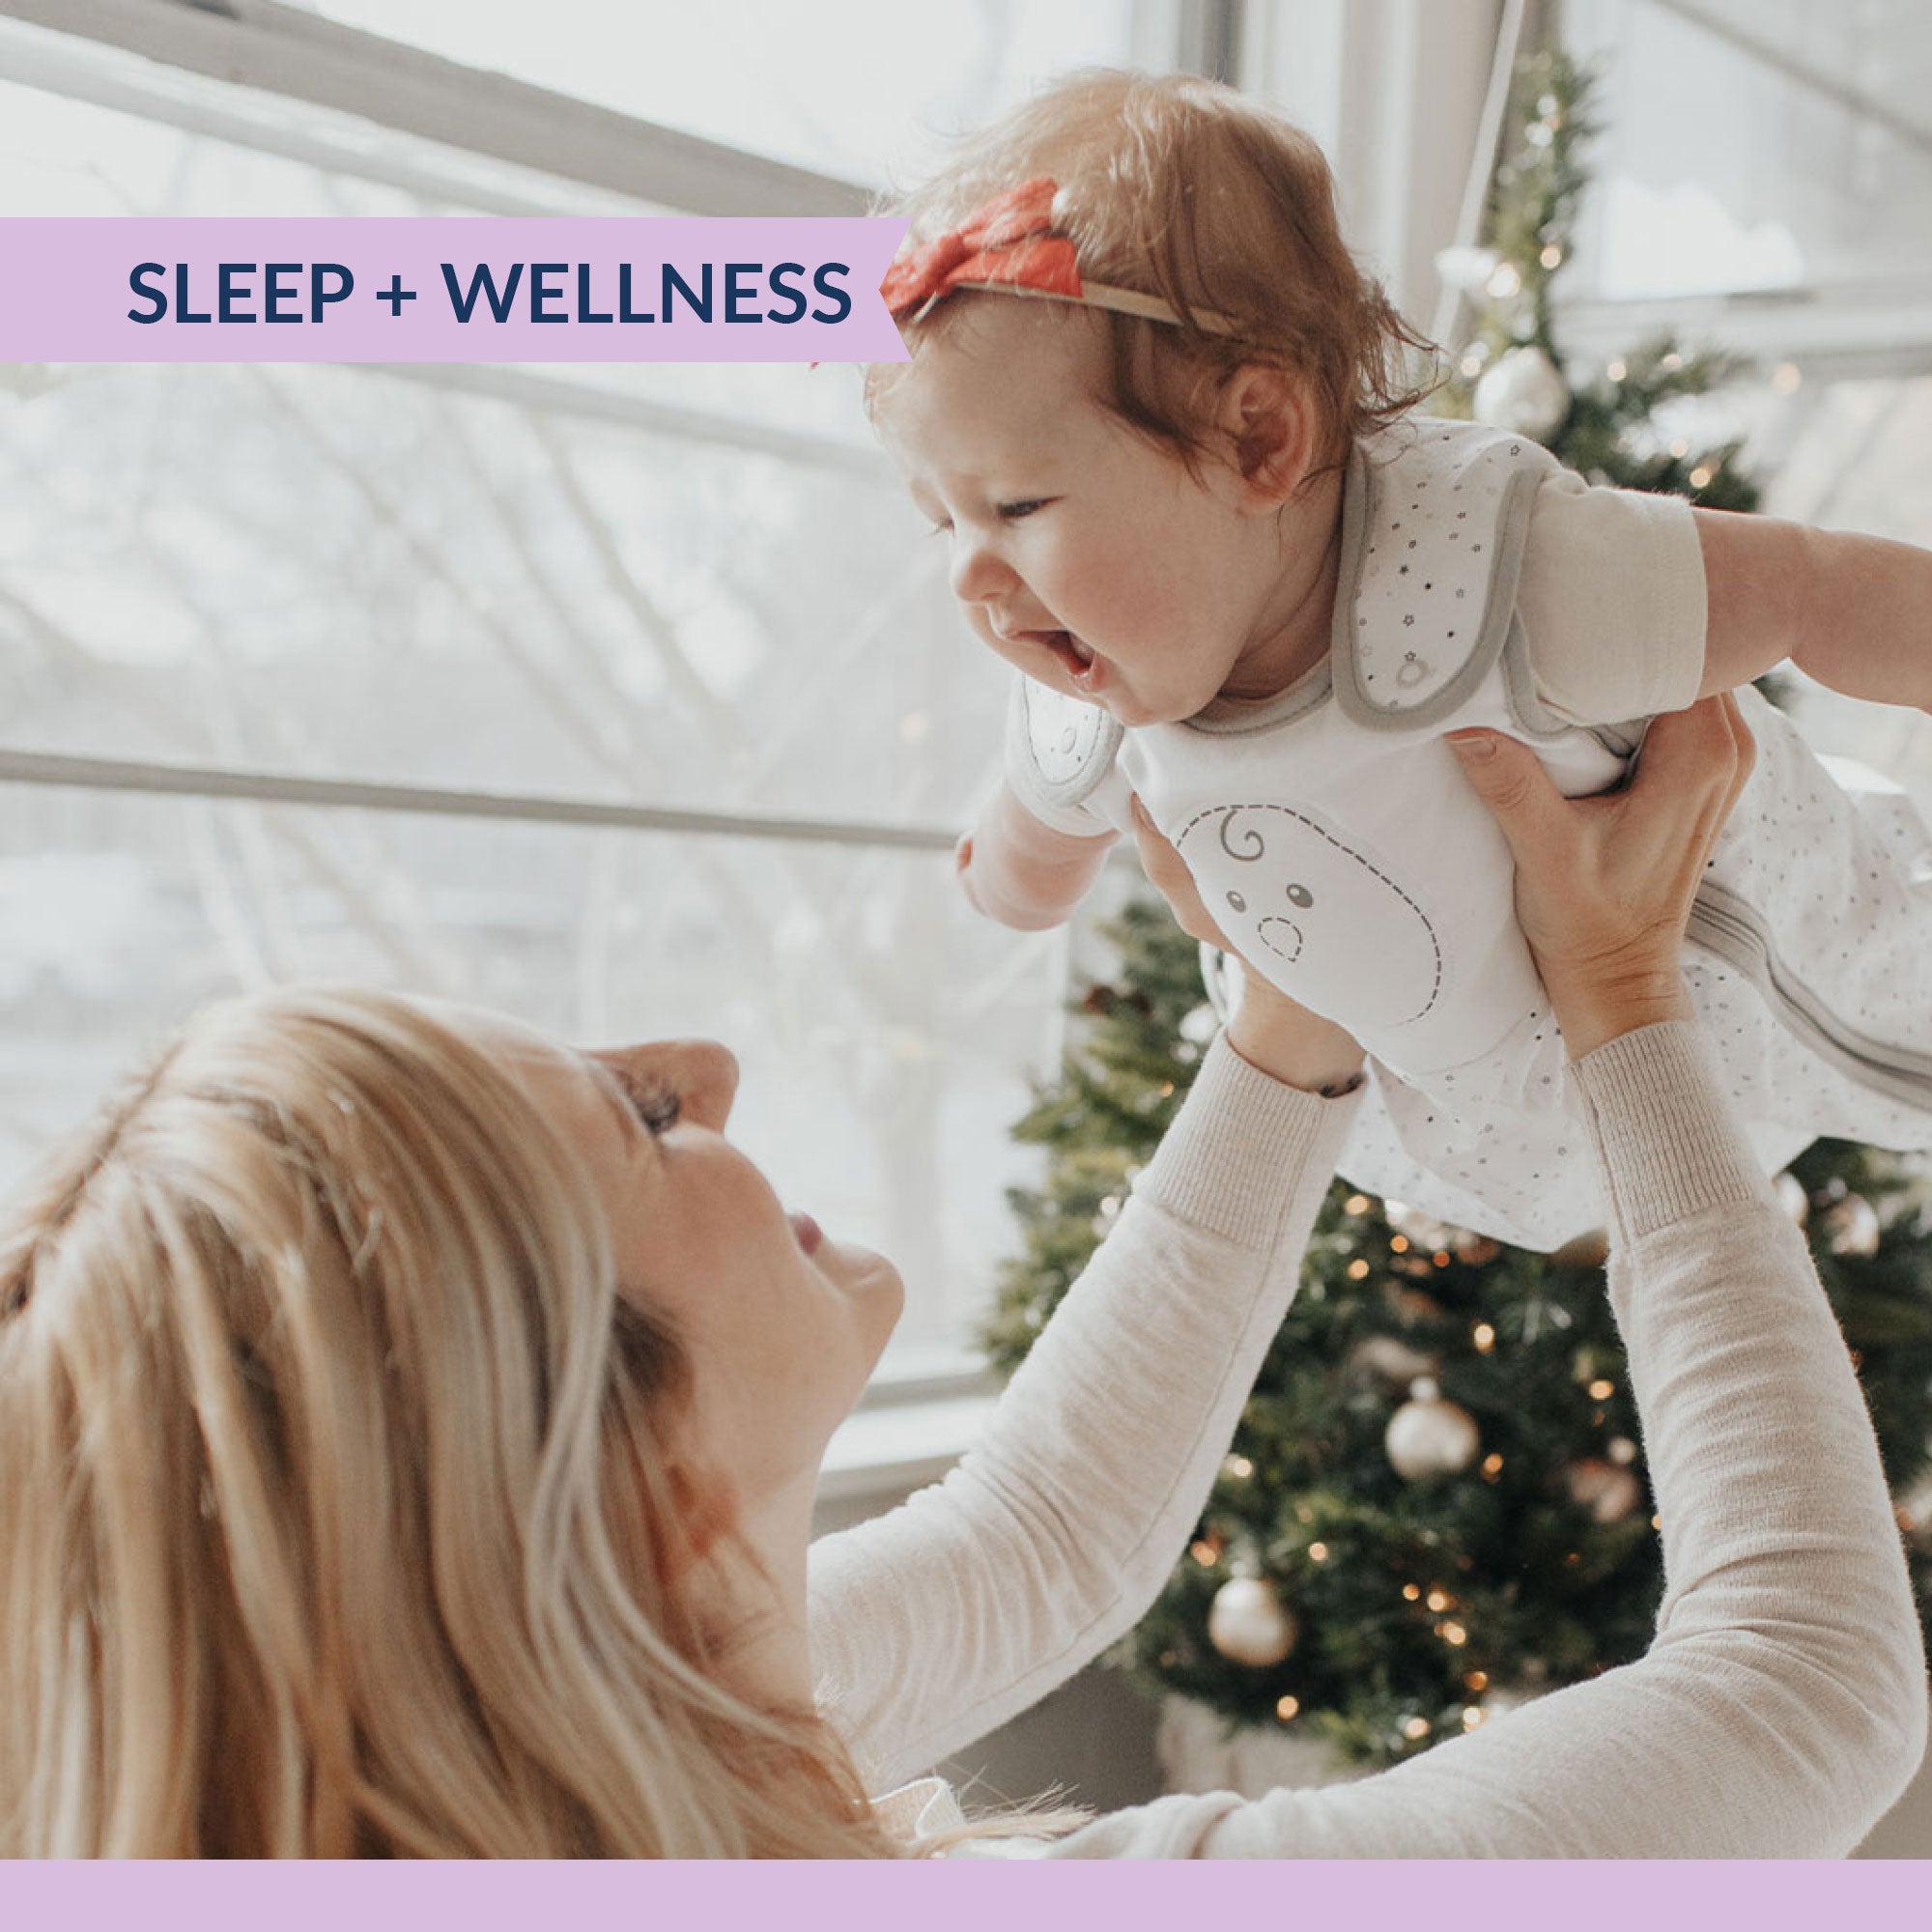 Sleep regression: Getting baby back on track after the holidays